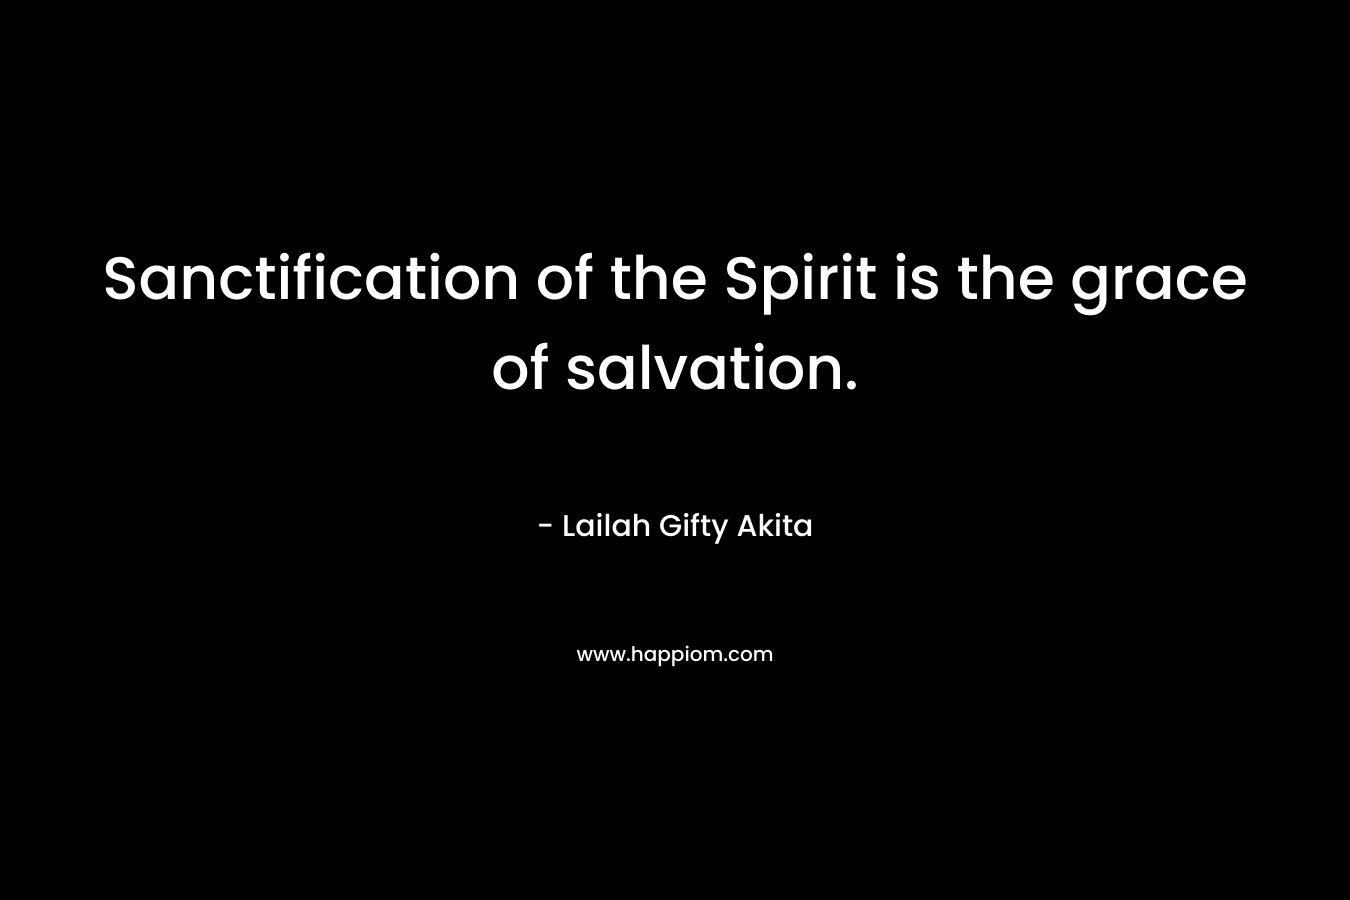 Sanctification of the Spirit is the grace of salvation. – Lailah Gifty Akita